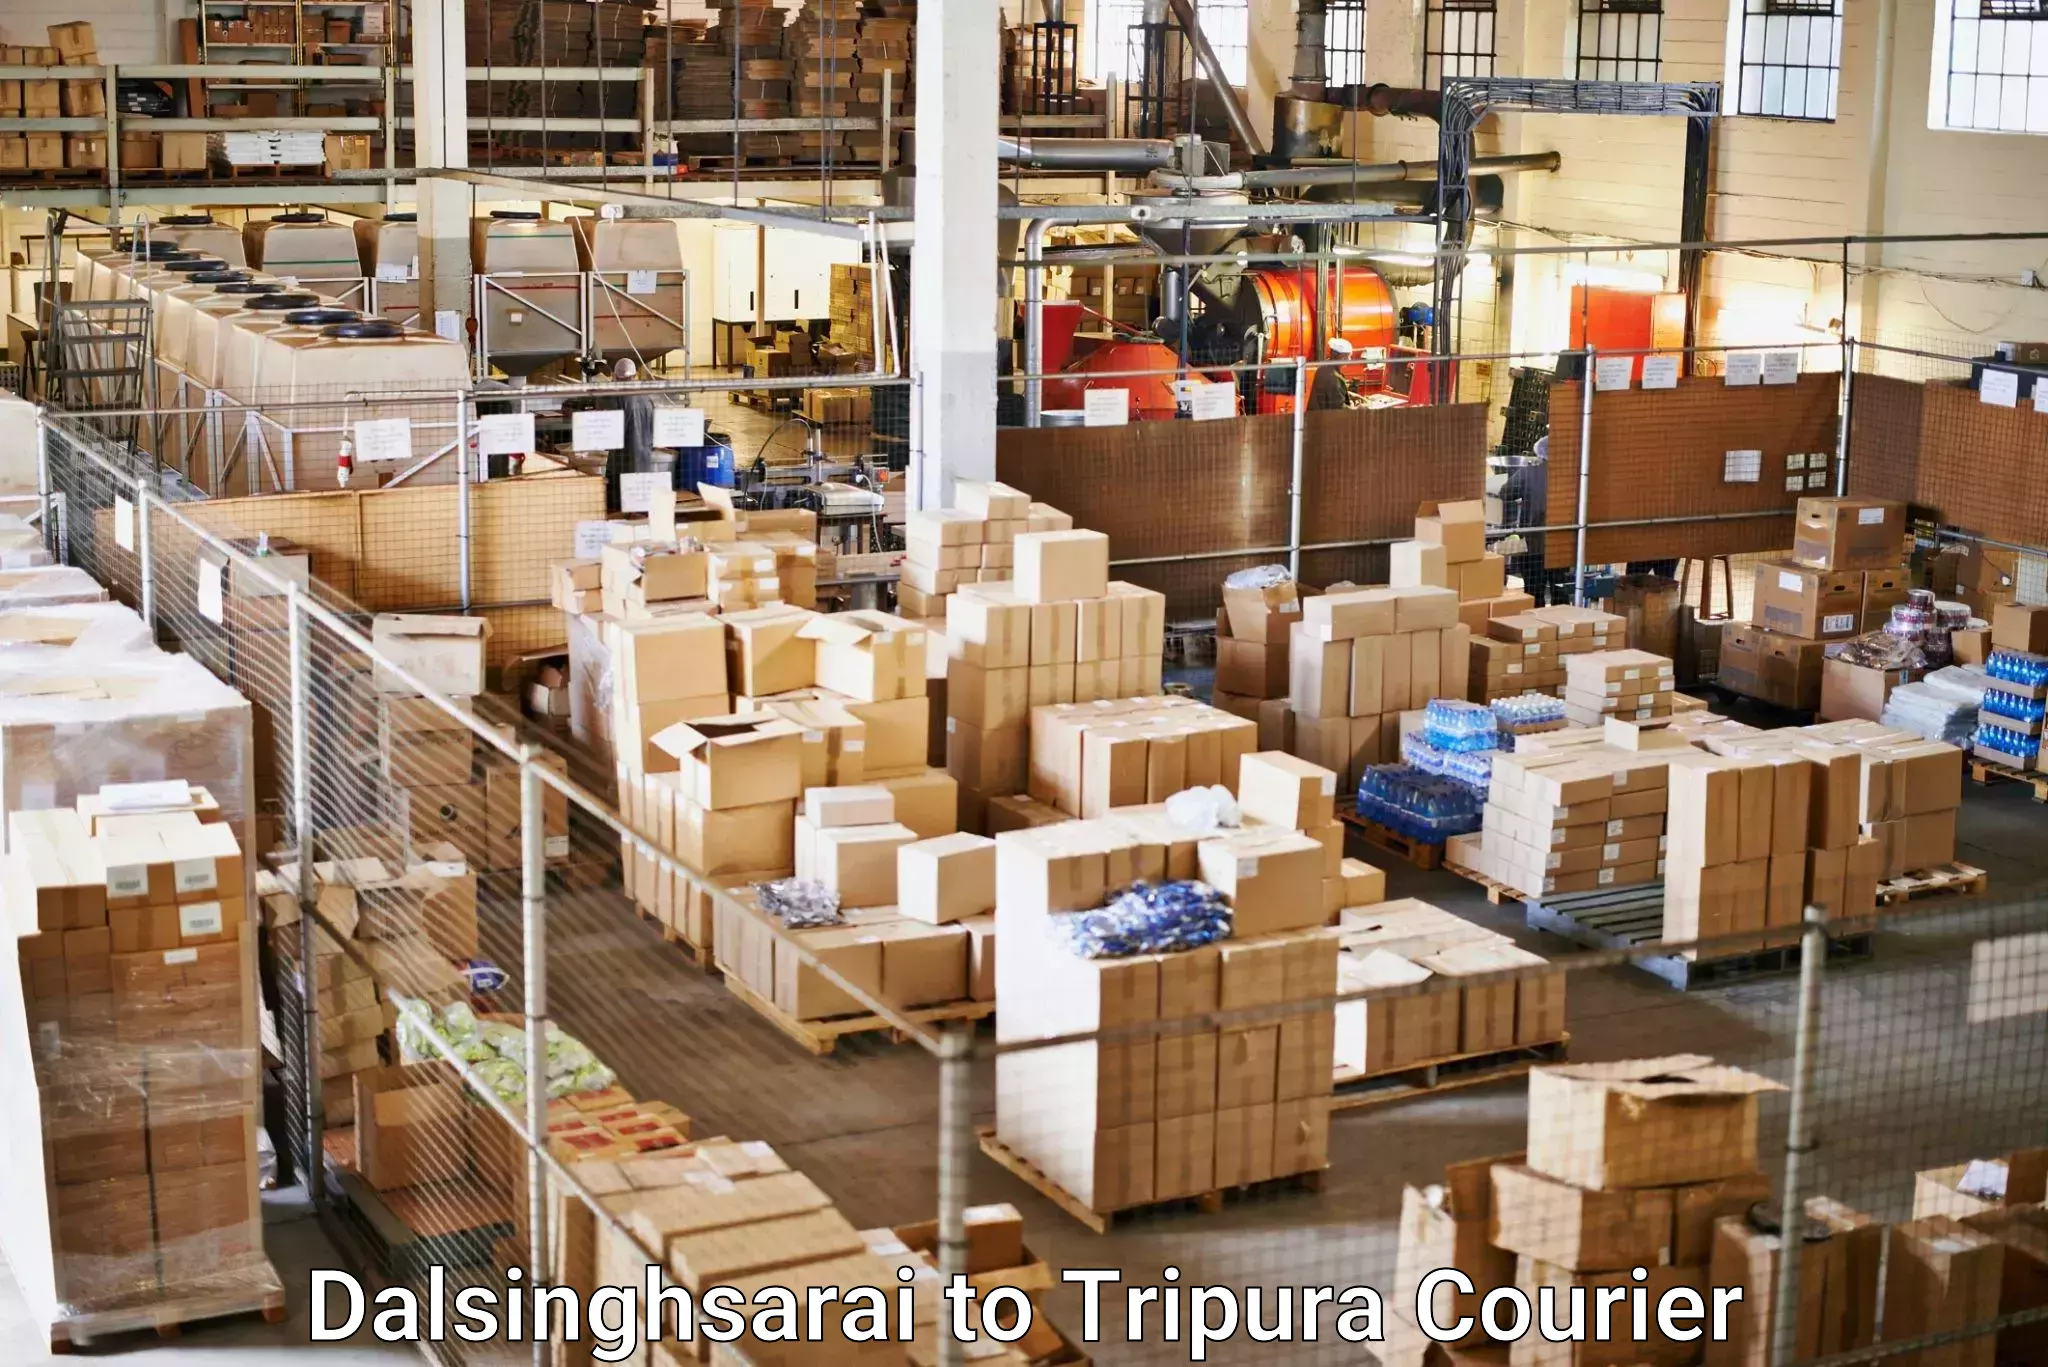 Integrated shipping solutions Dalsinghsarai to Tripura